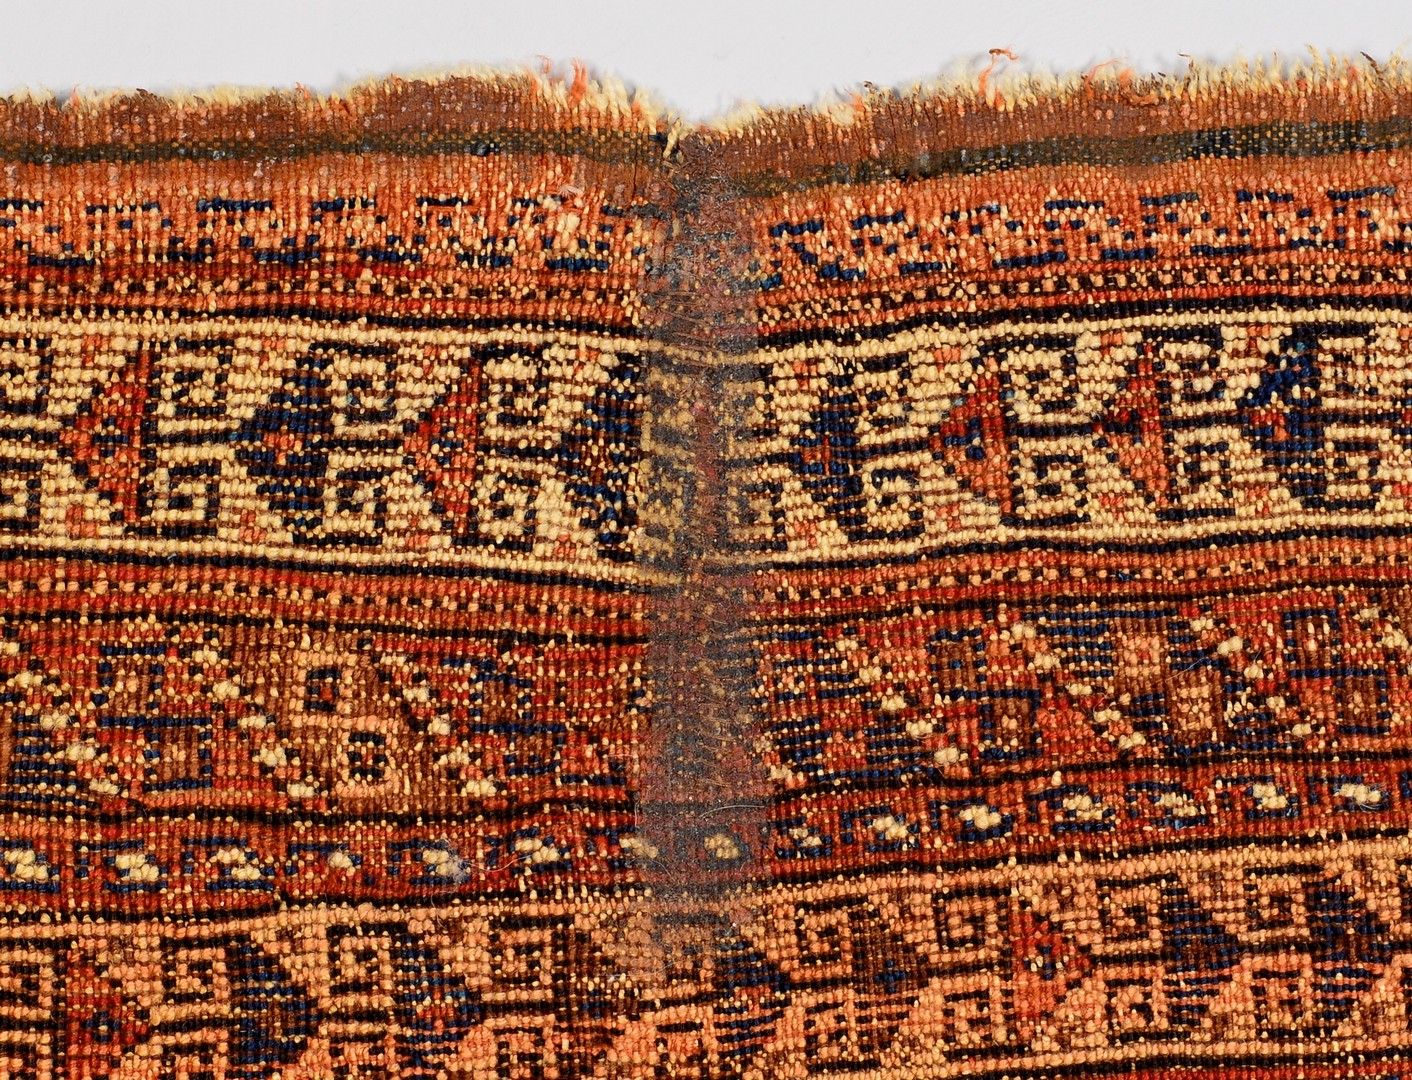 Lot 912: Group of 3 Antique Tribal Area Rugs